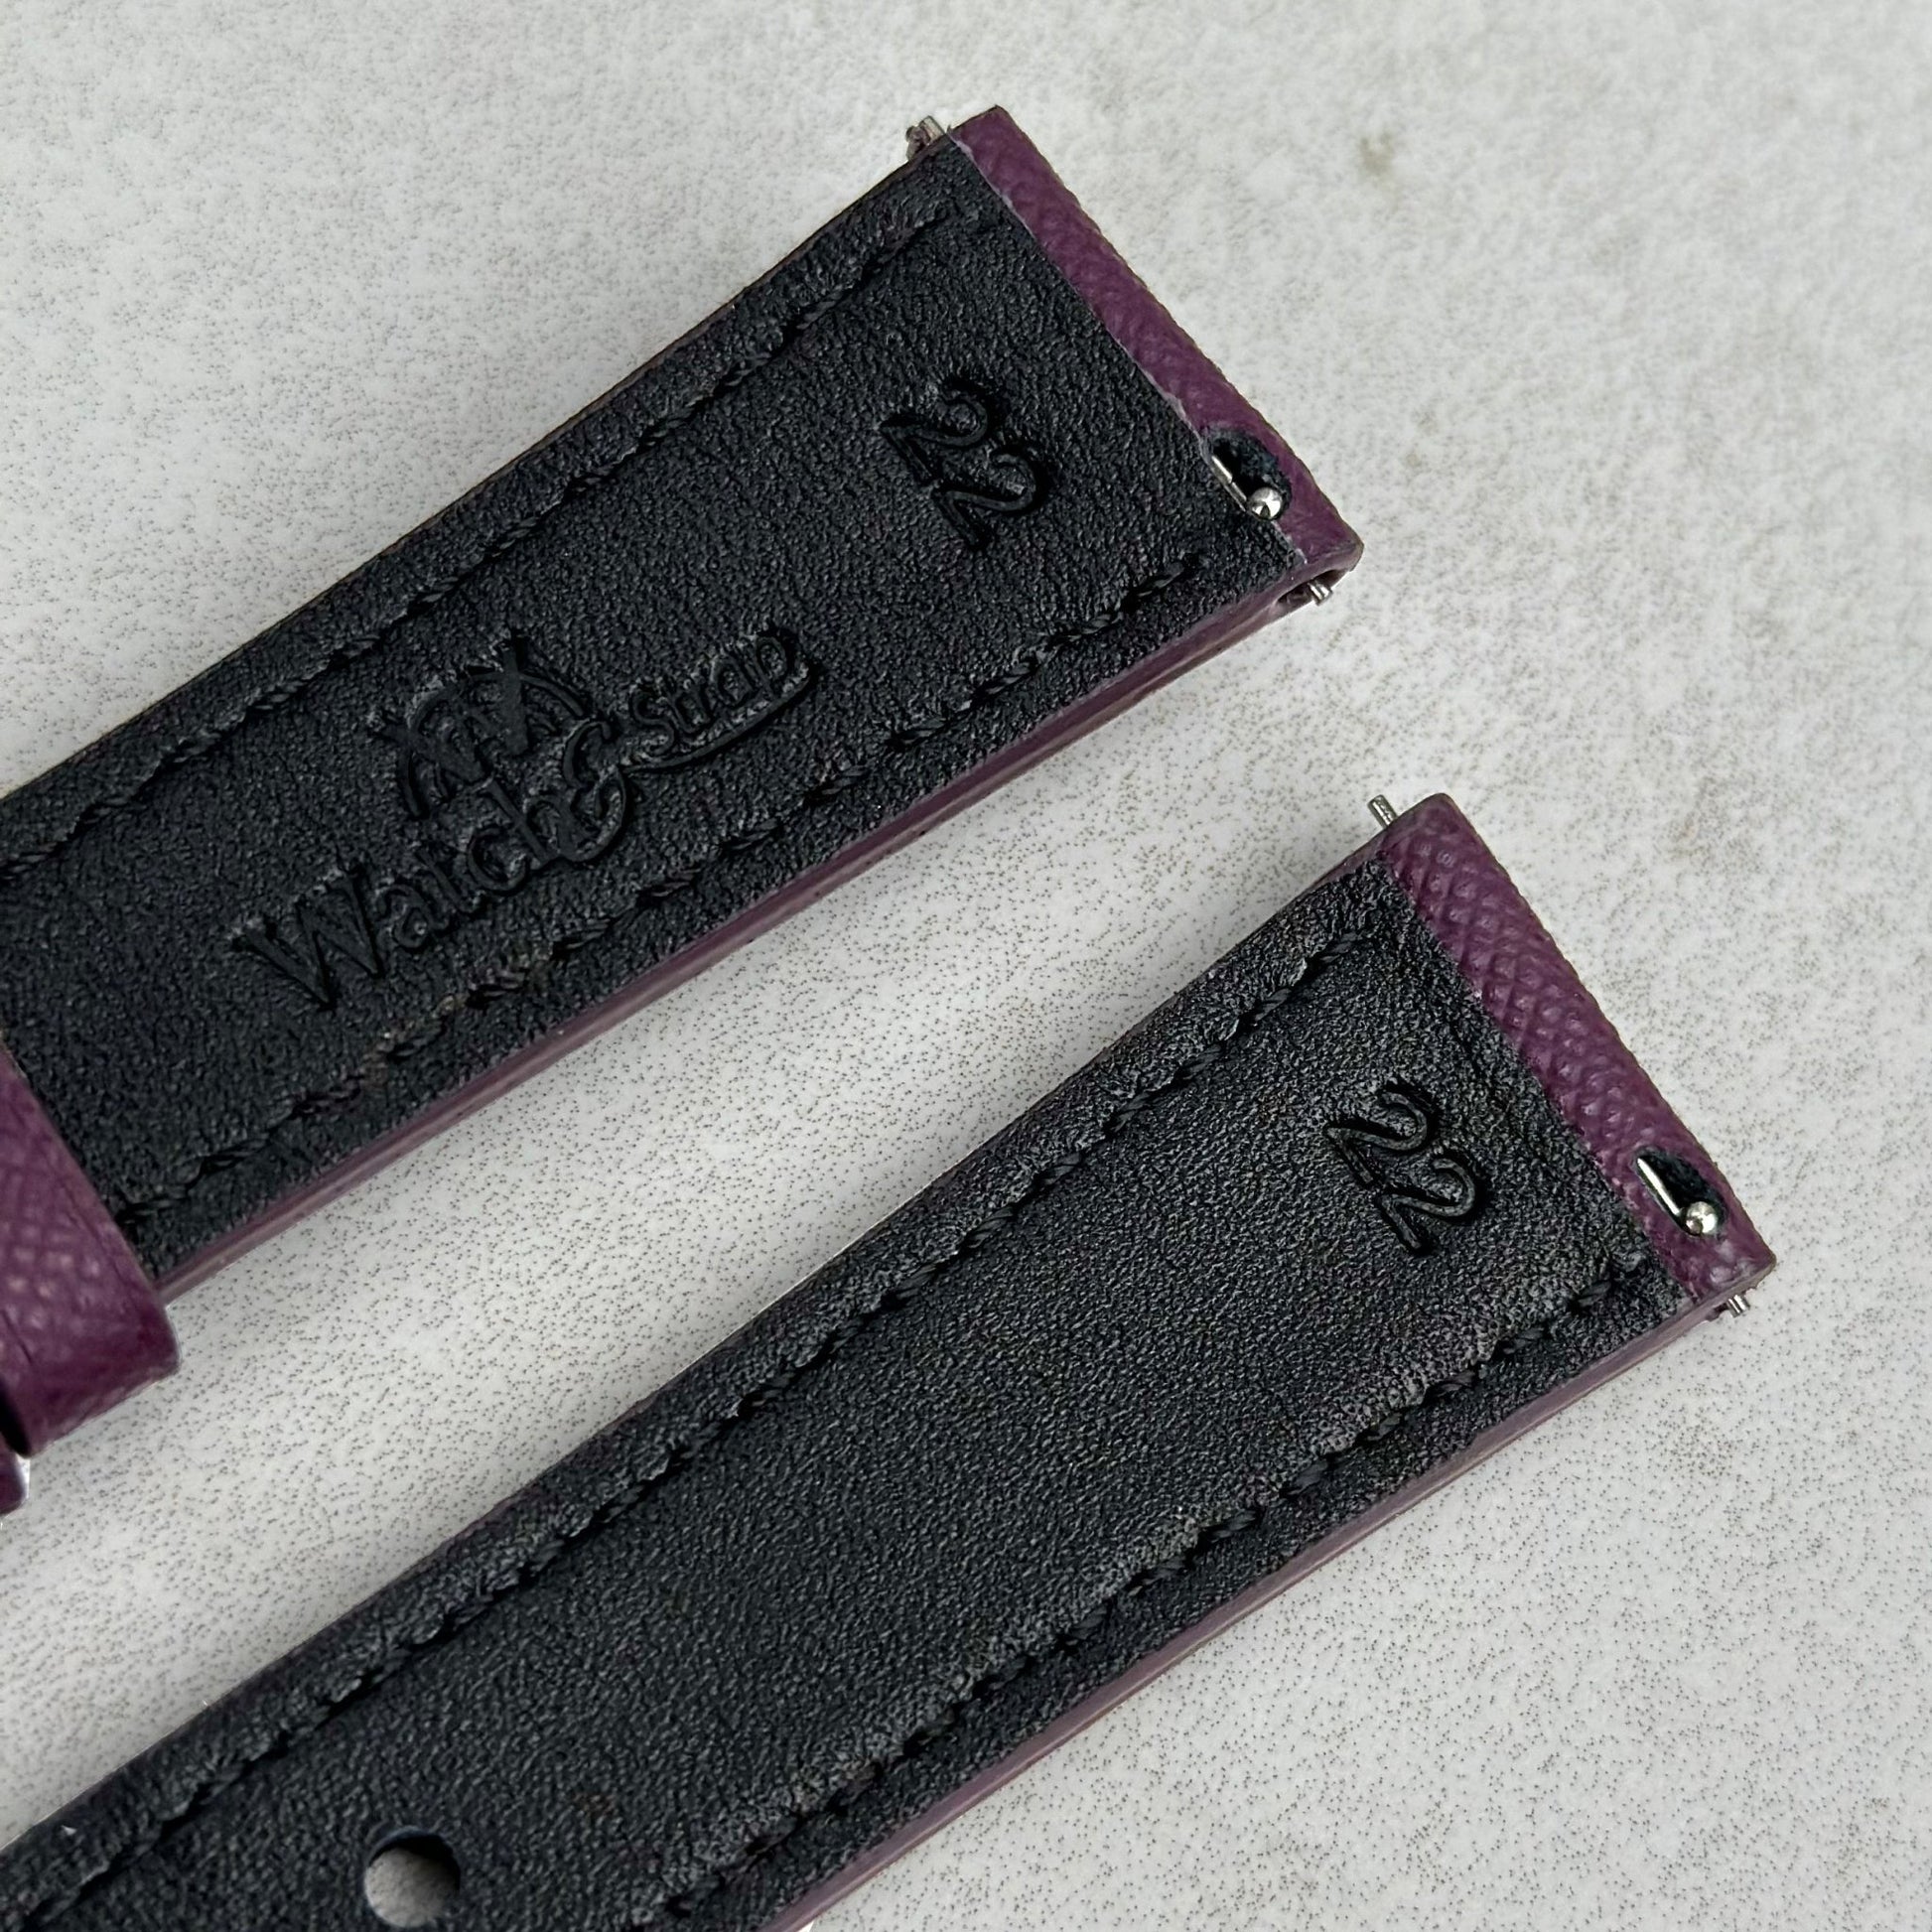 Quick release pins on the Florence royal purple Saffiano leather watch strap. 18mm, 20mm, 22mm, 24mm. Watch And Strap.